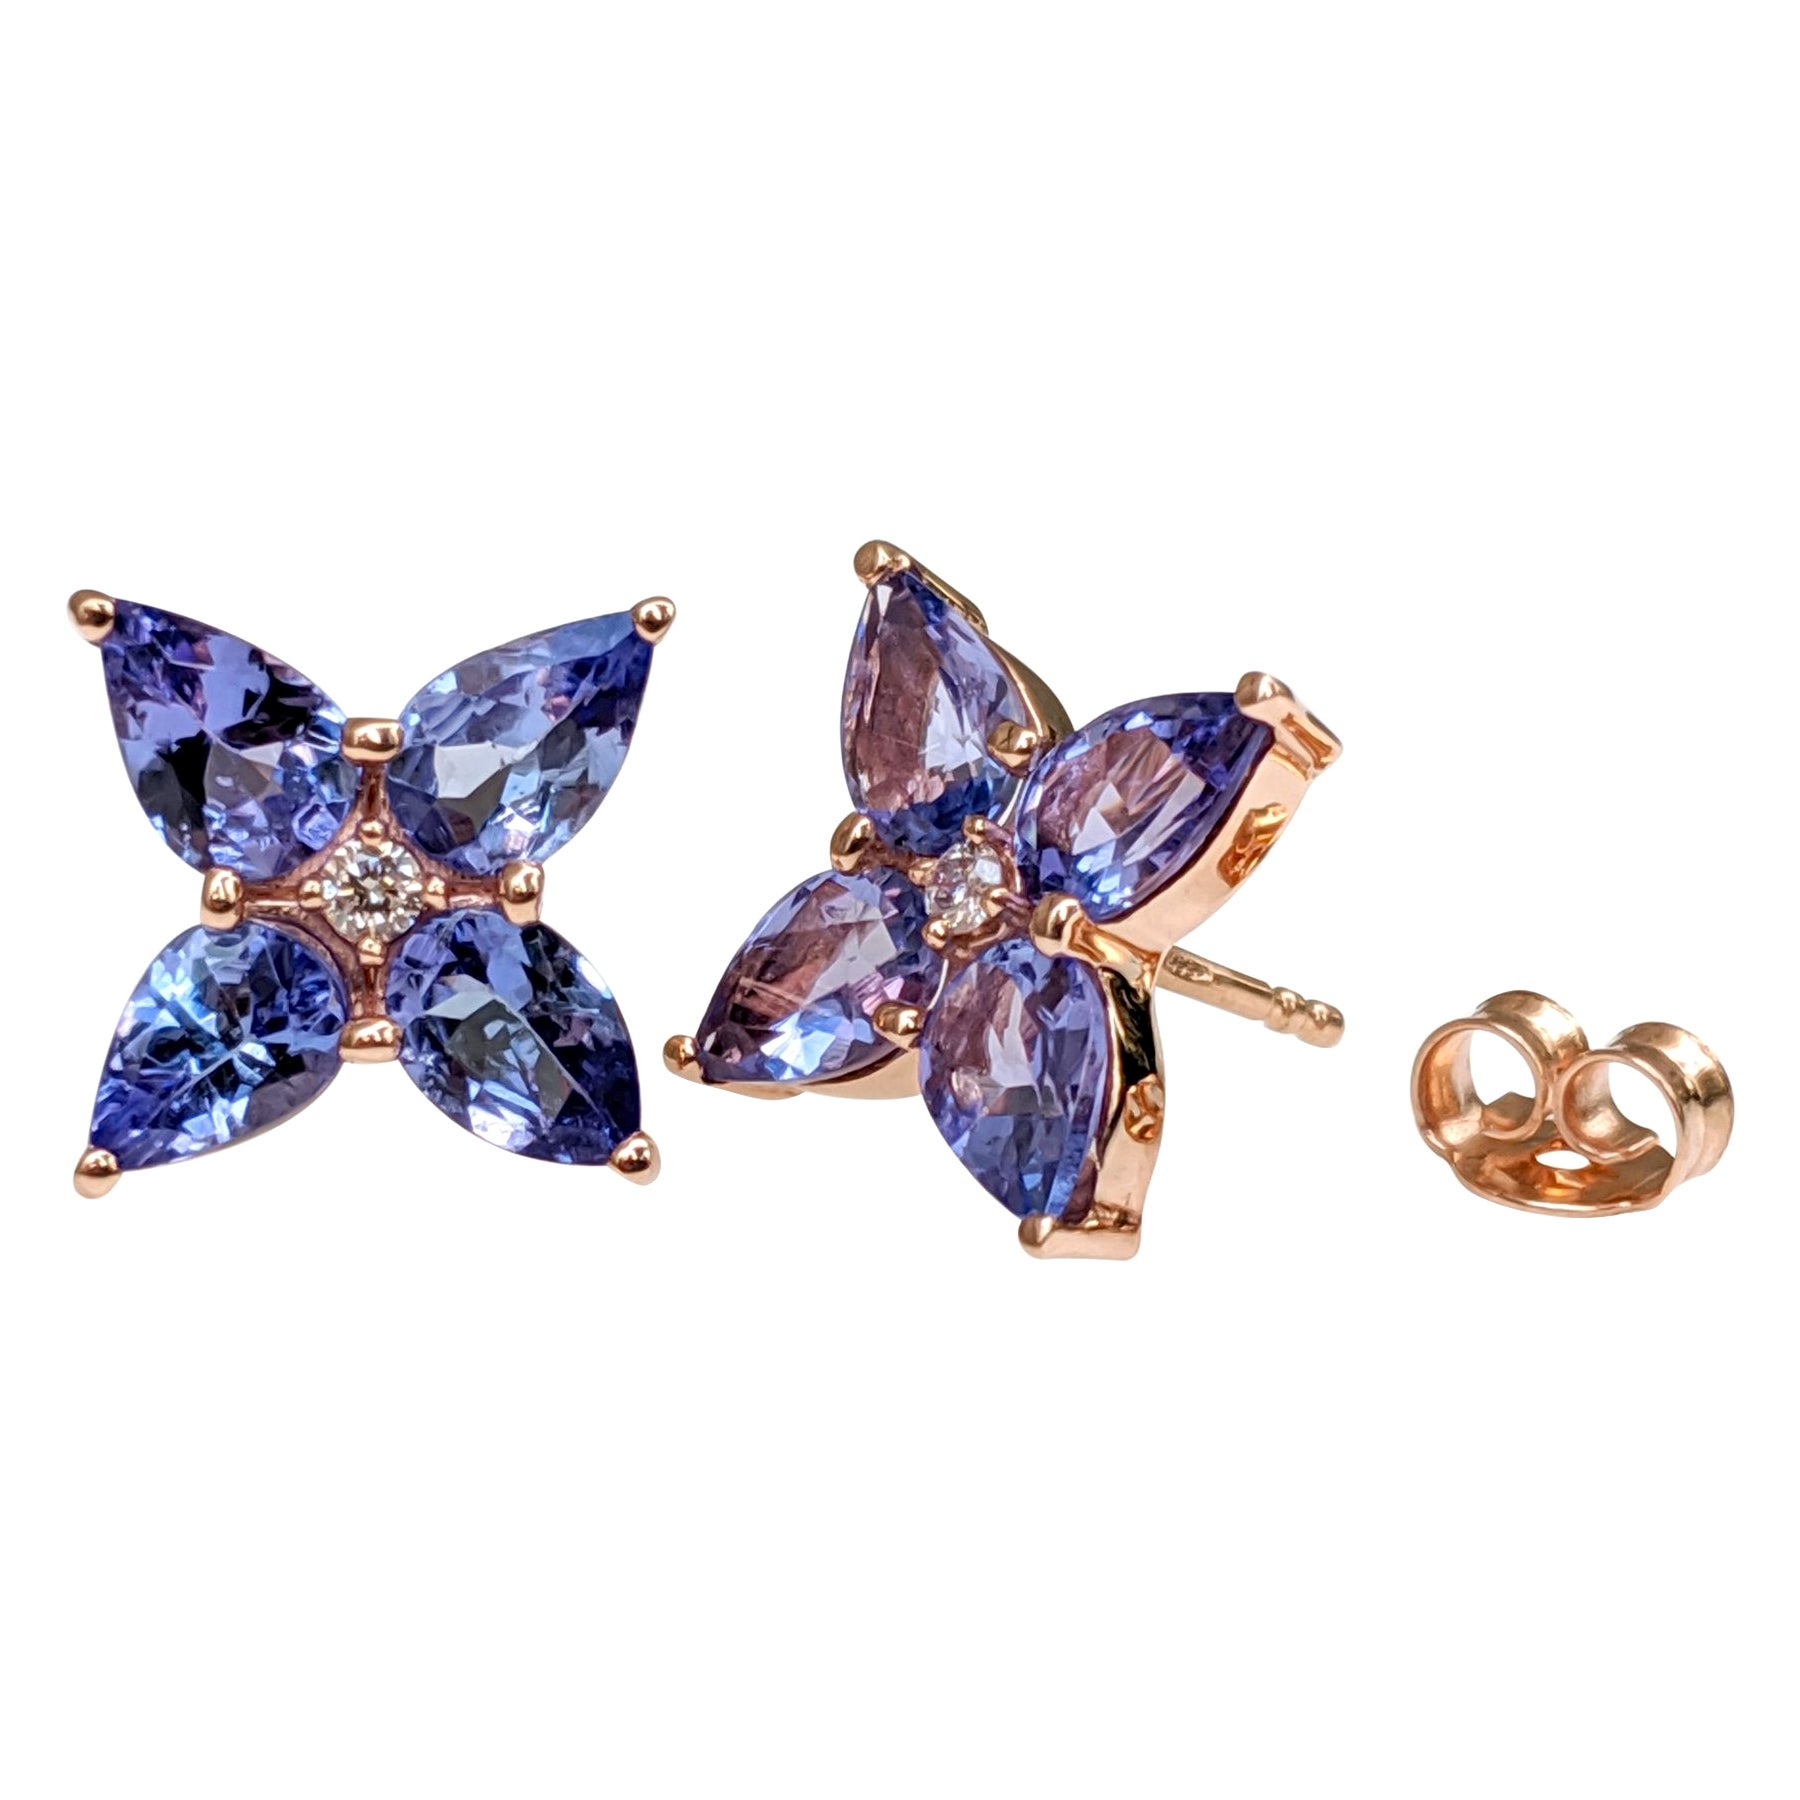 NO RESERVE! 2.78Ct Tanzanite and 0.02Ct Diamonds - 14 kt. Pink gold - Earrings For Sale